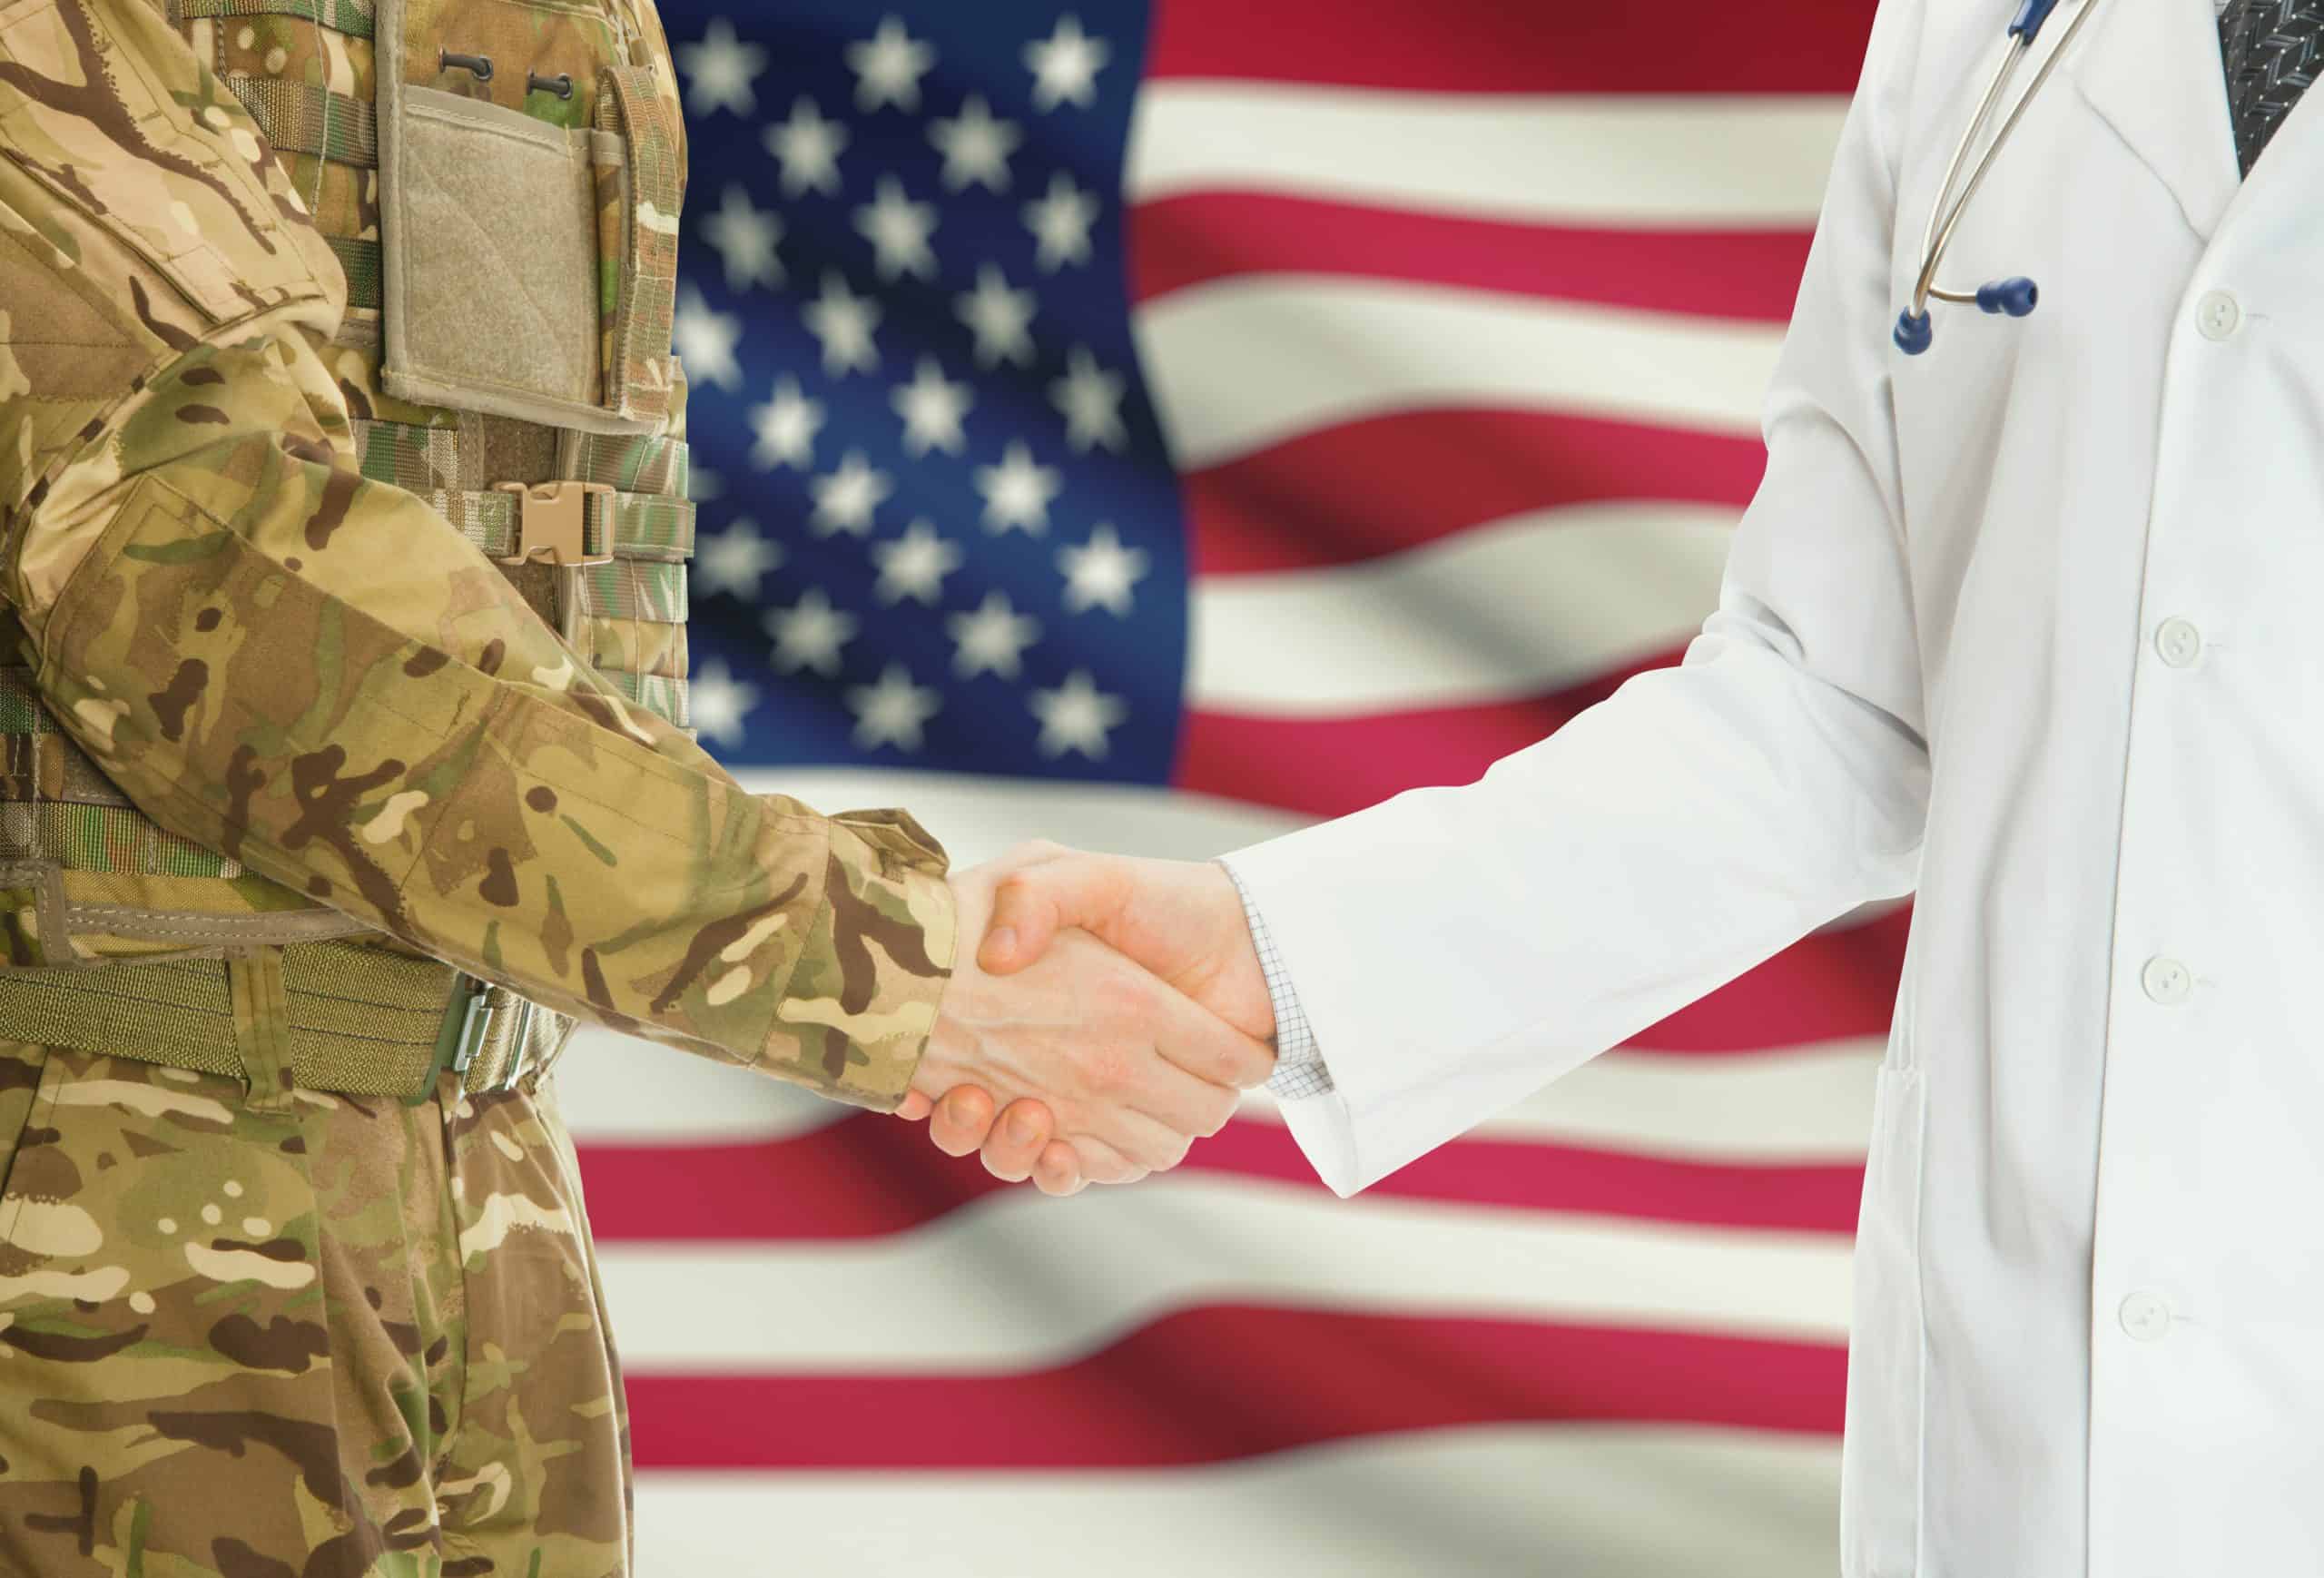 US military personnel shaking hands with medical professional with US flag in background